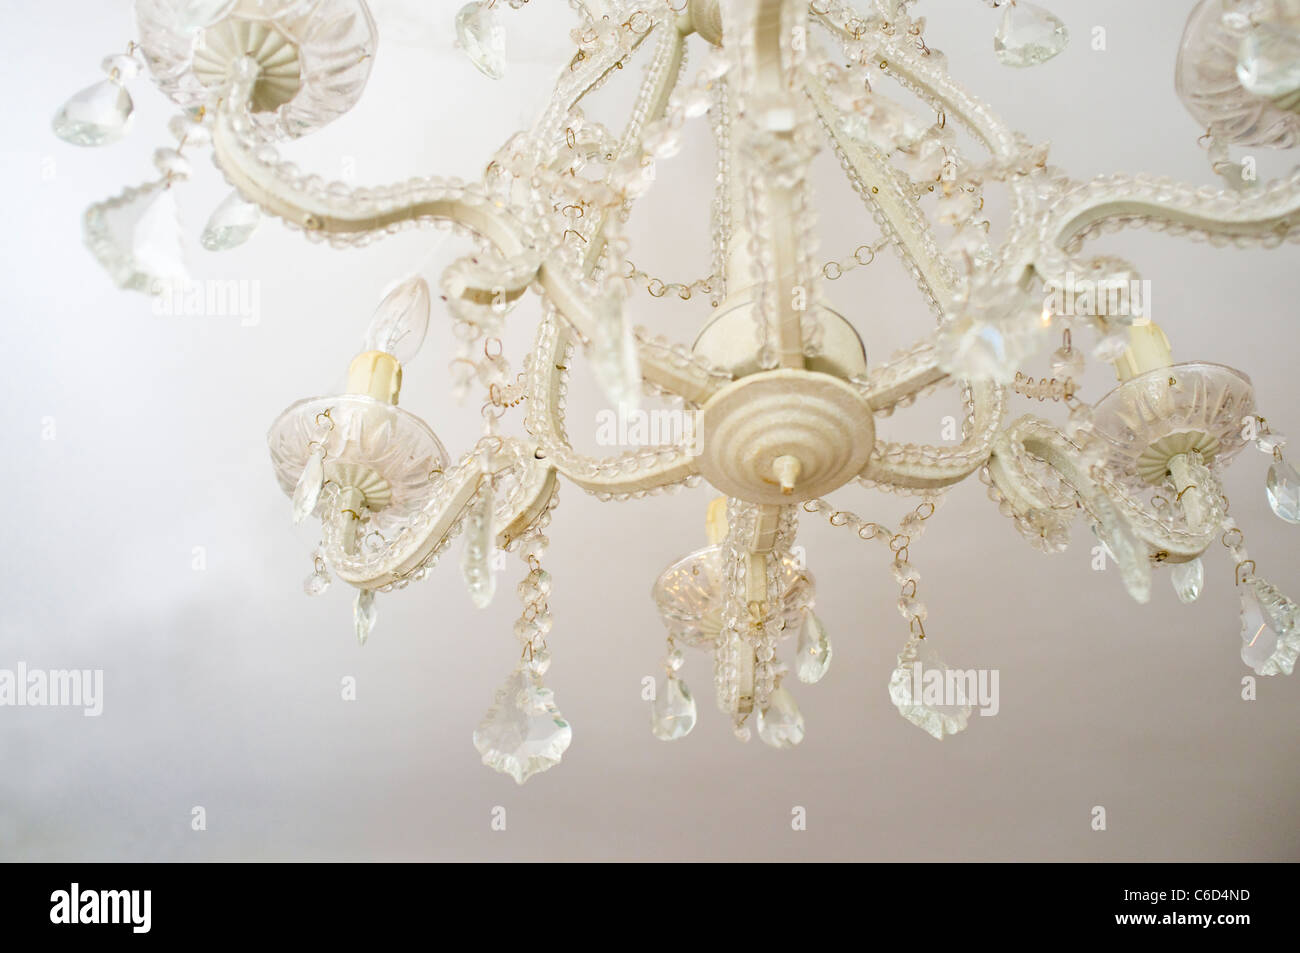 White chandelier against a white ceiling. Stock Photo